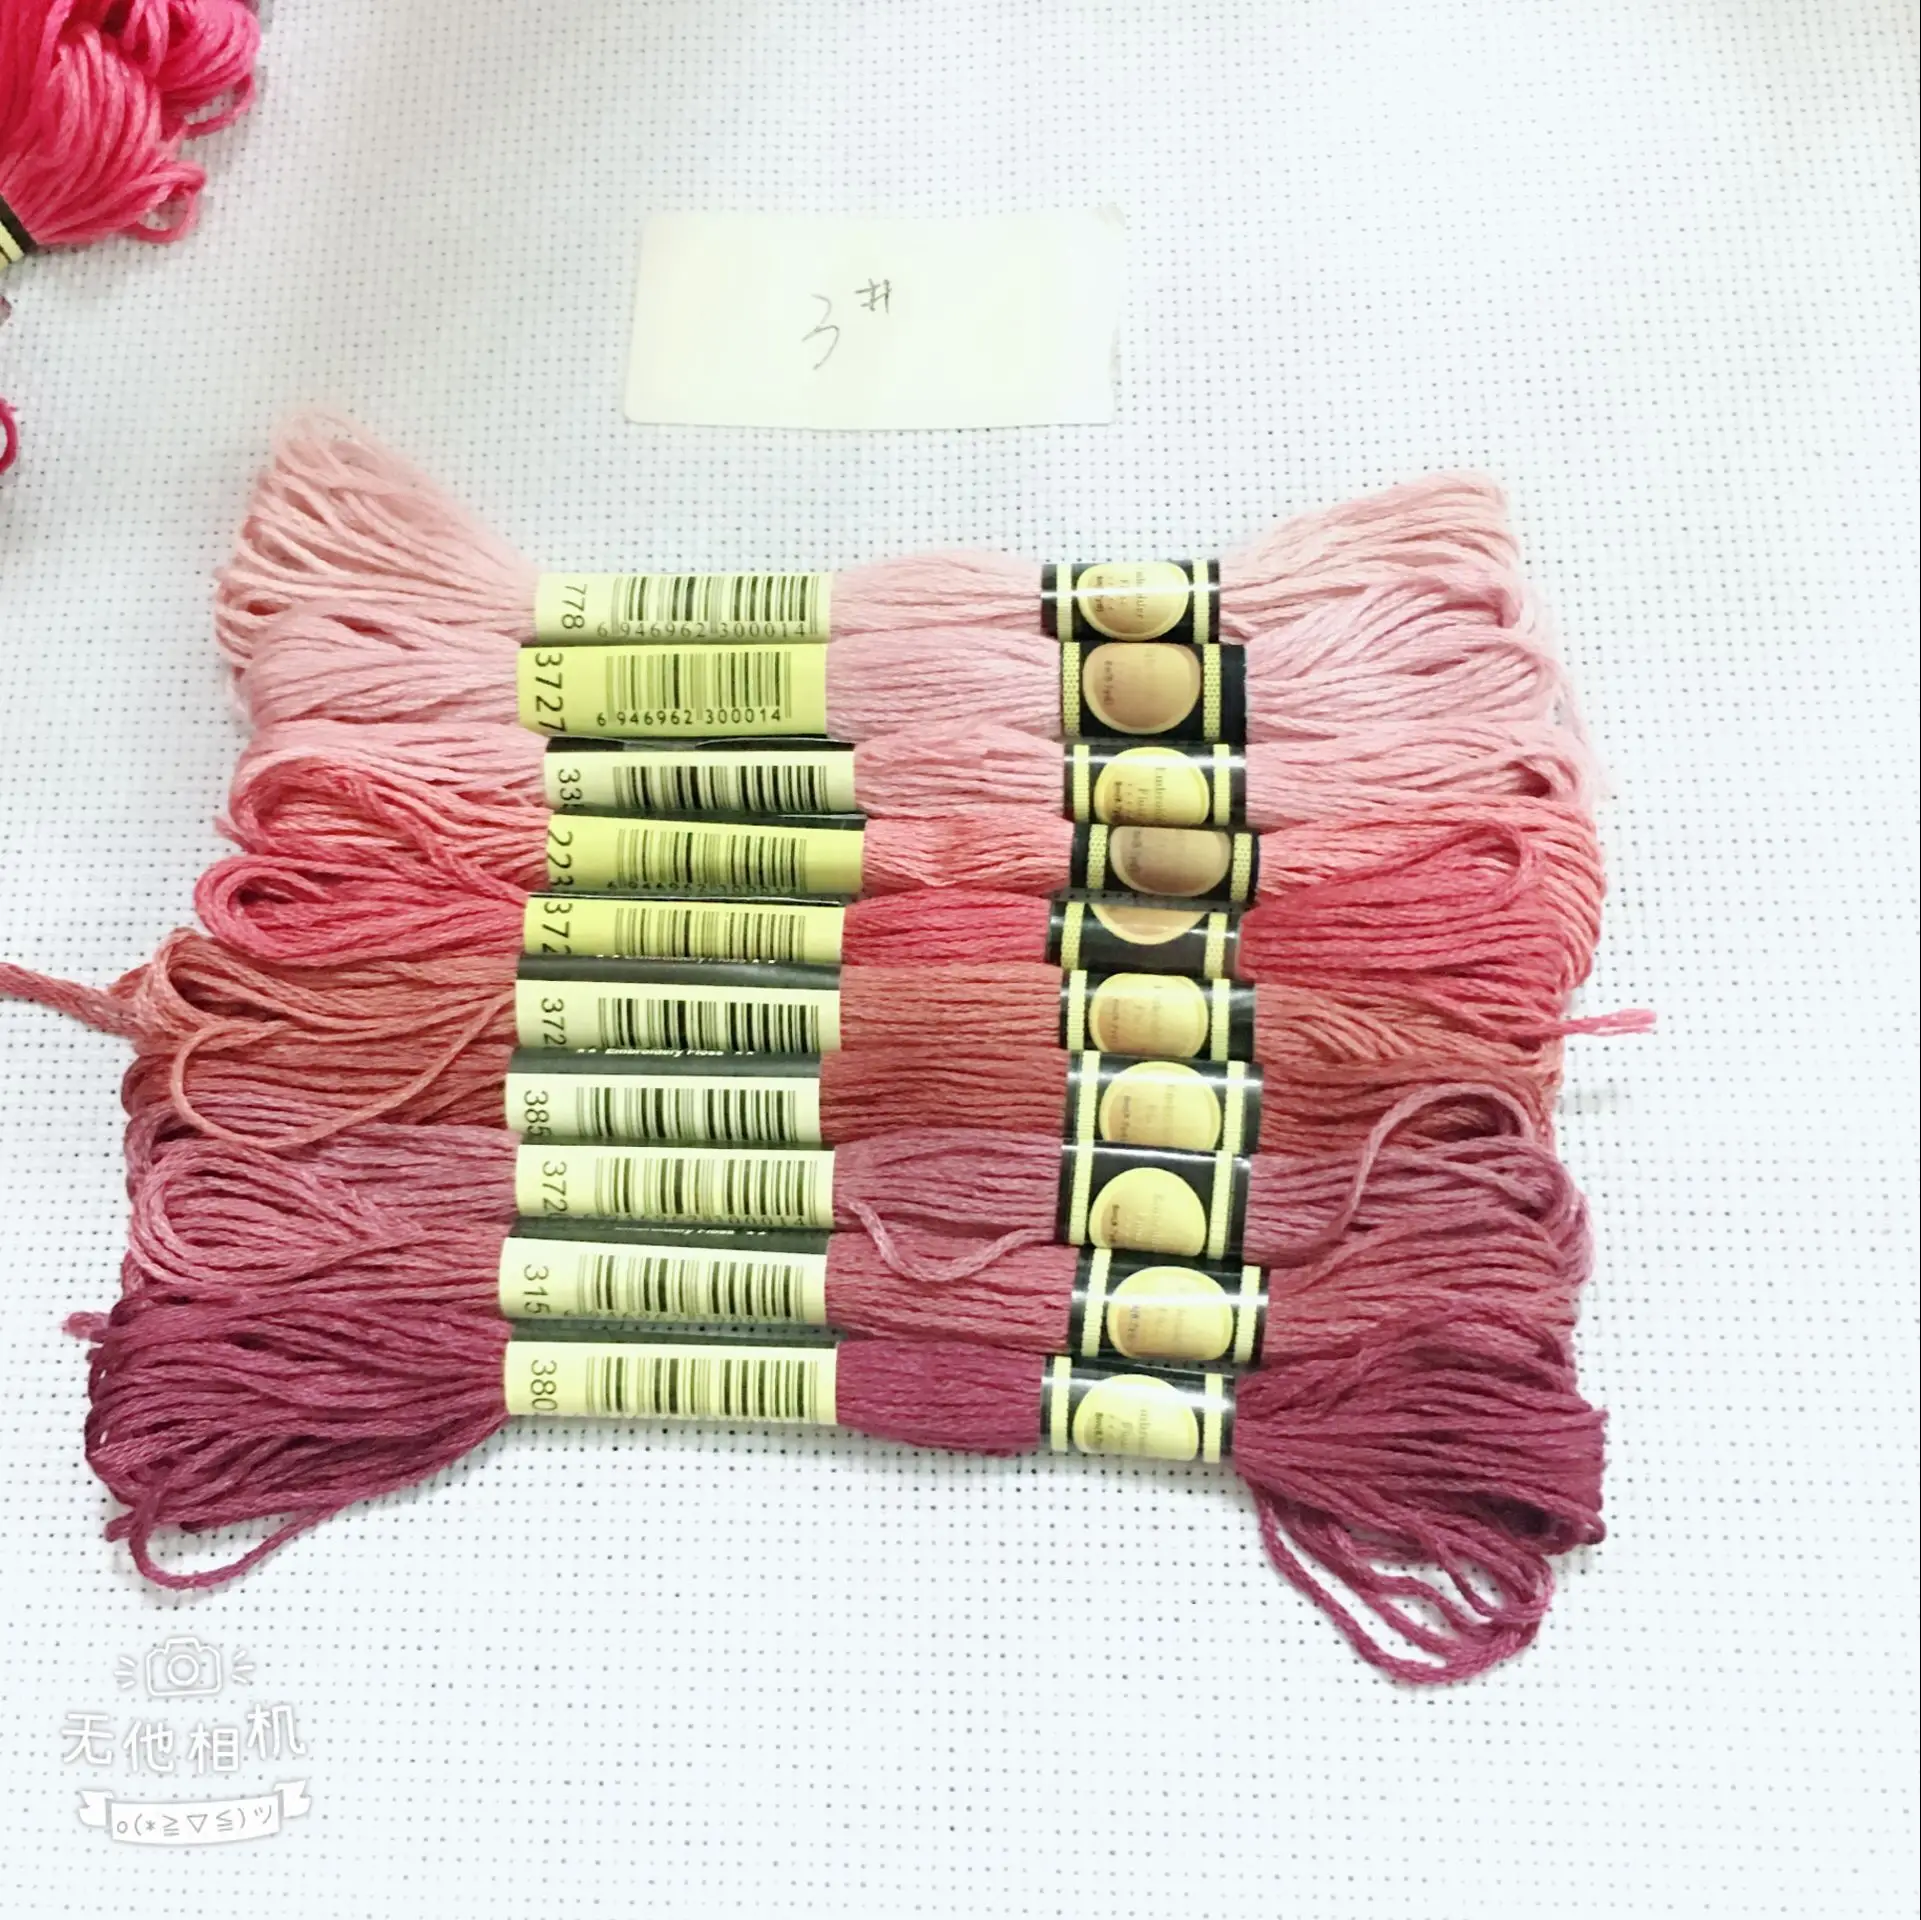 

YZXINYUAN 8pcs Mix Colors Cross Stitch Cotton Sewing Skeins Craft Embroidery Thread Floss Kit DIY Sewing Tools Accessories